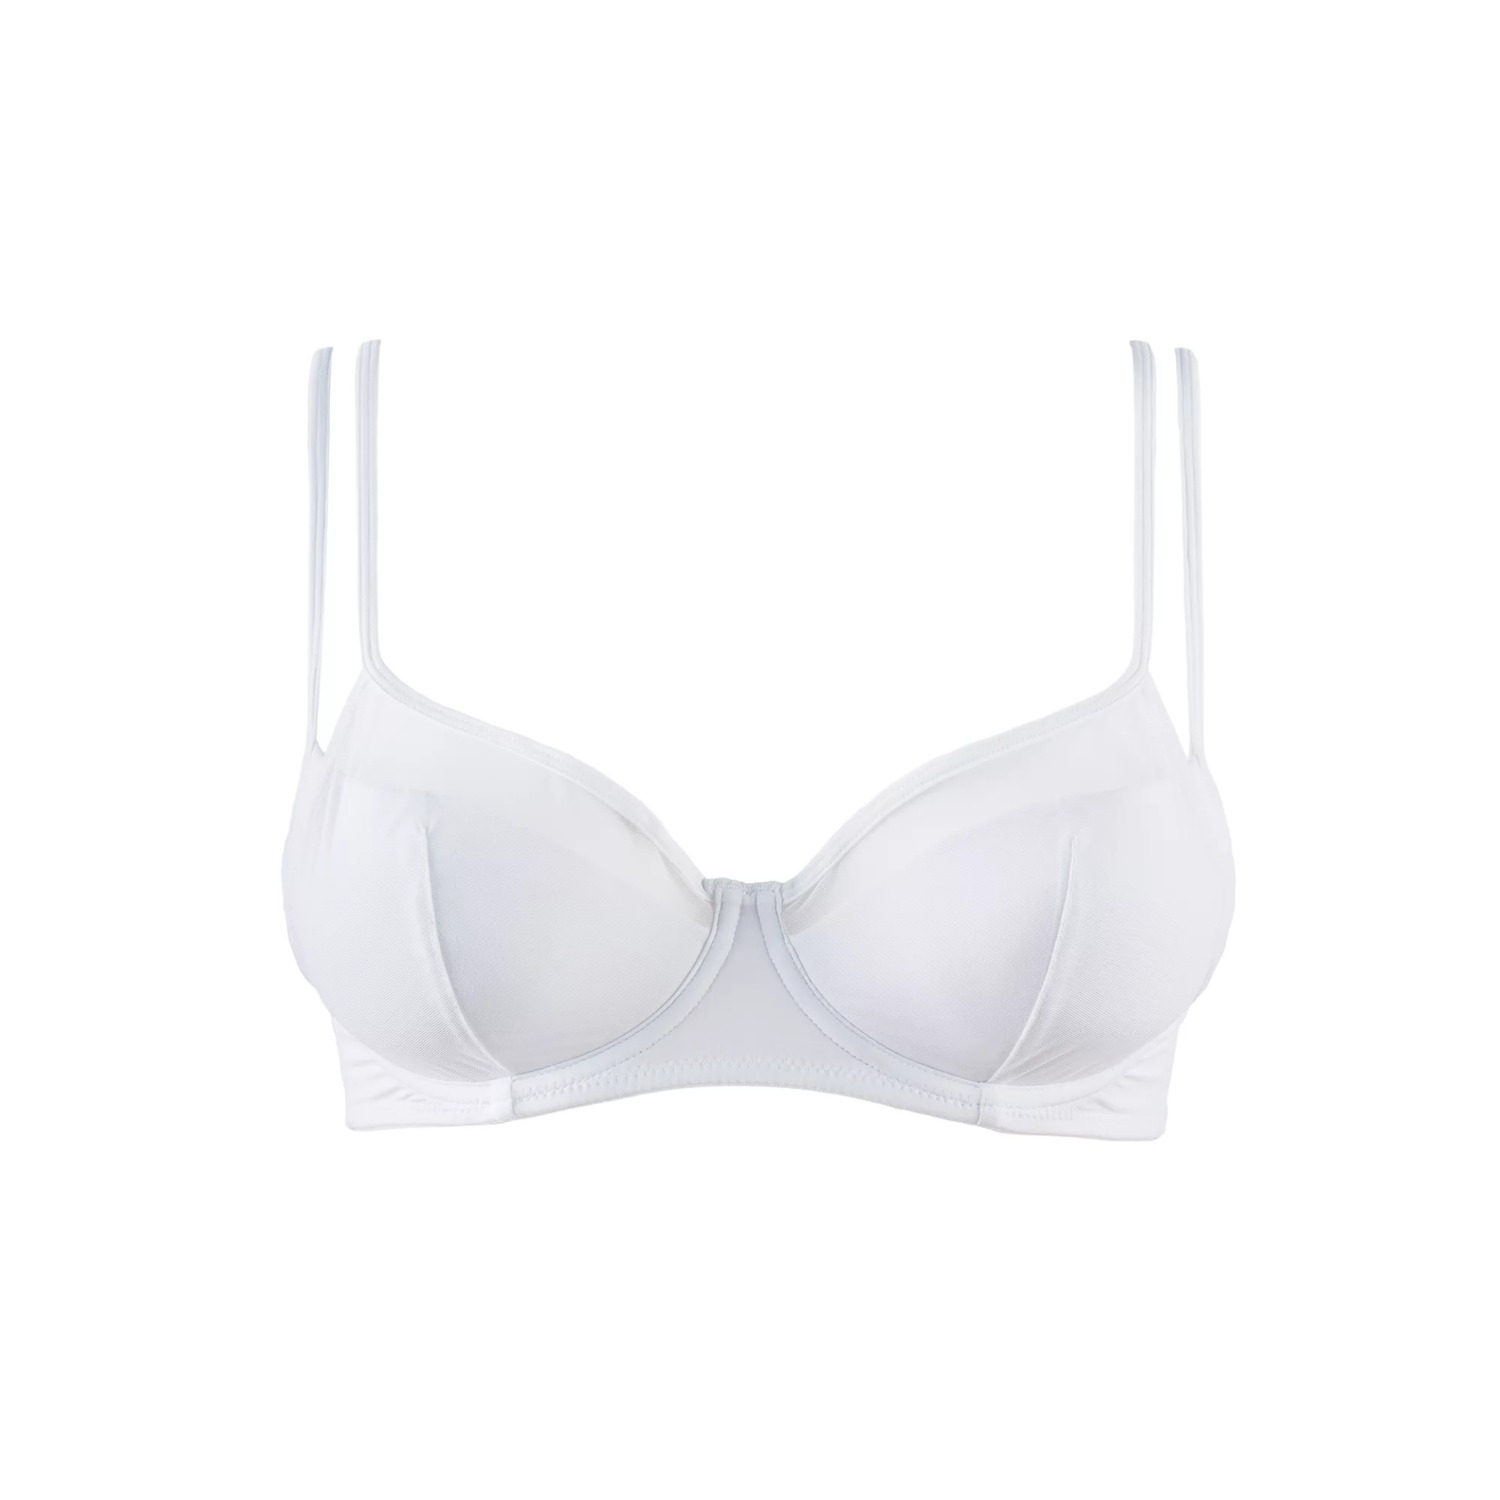 https://res.cloudinary.com/wolfandbadger/image/upload/s--N-2e2-hU--/products/push-up-bra-triangle-effect-white-pure-tentation__f736ab0db5a2e4825599fcd4fdcc21d4